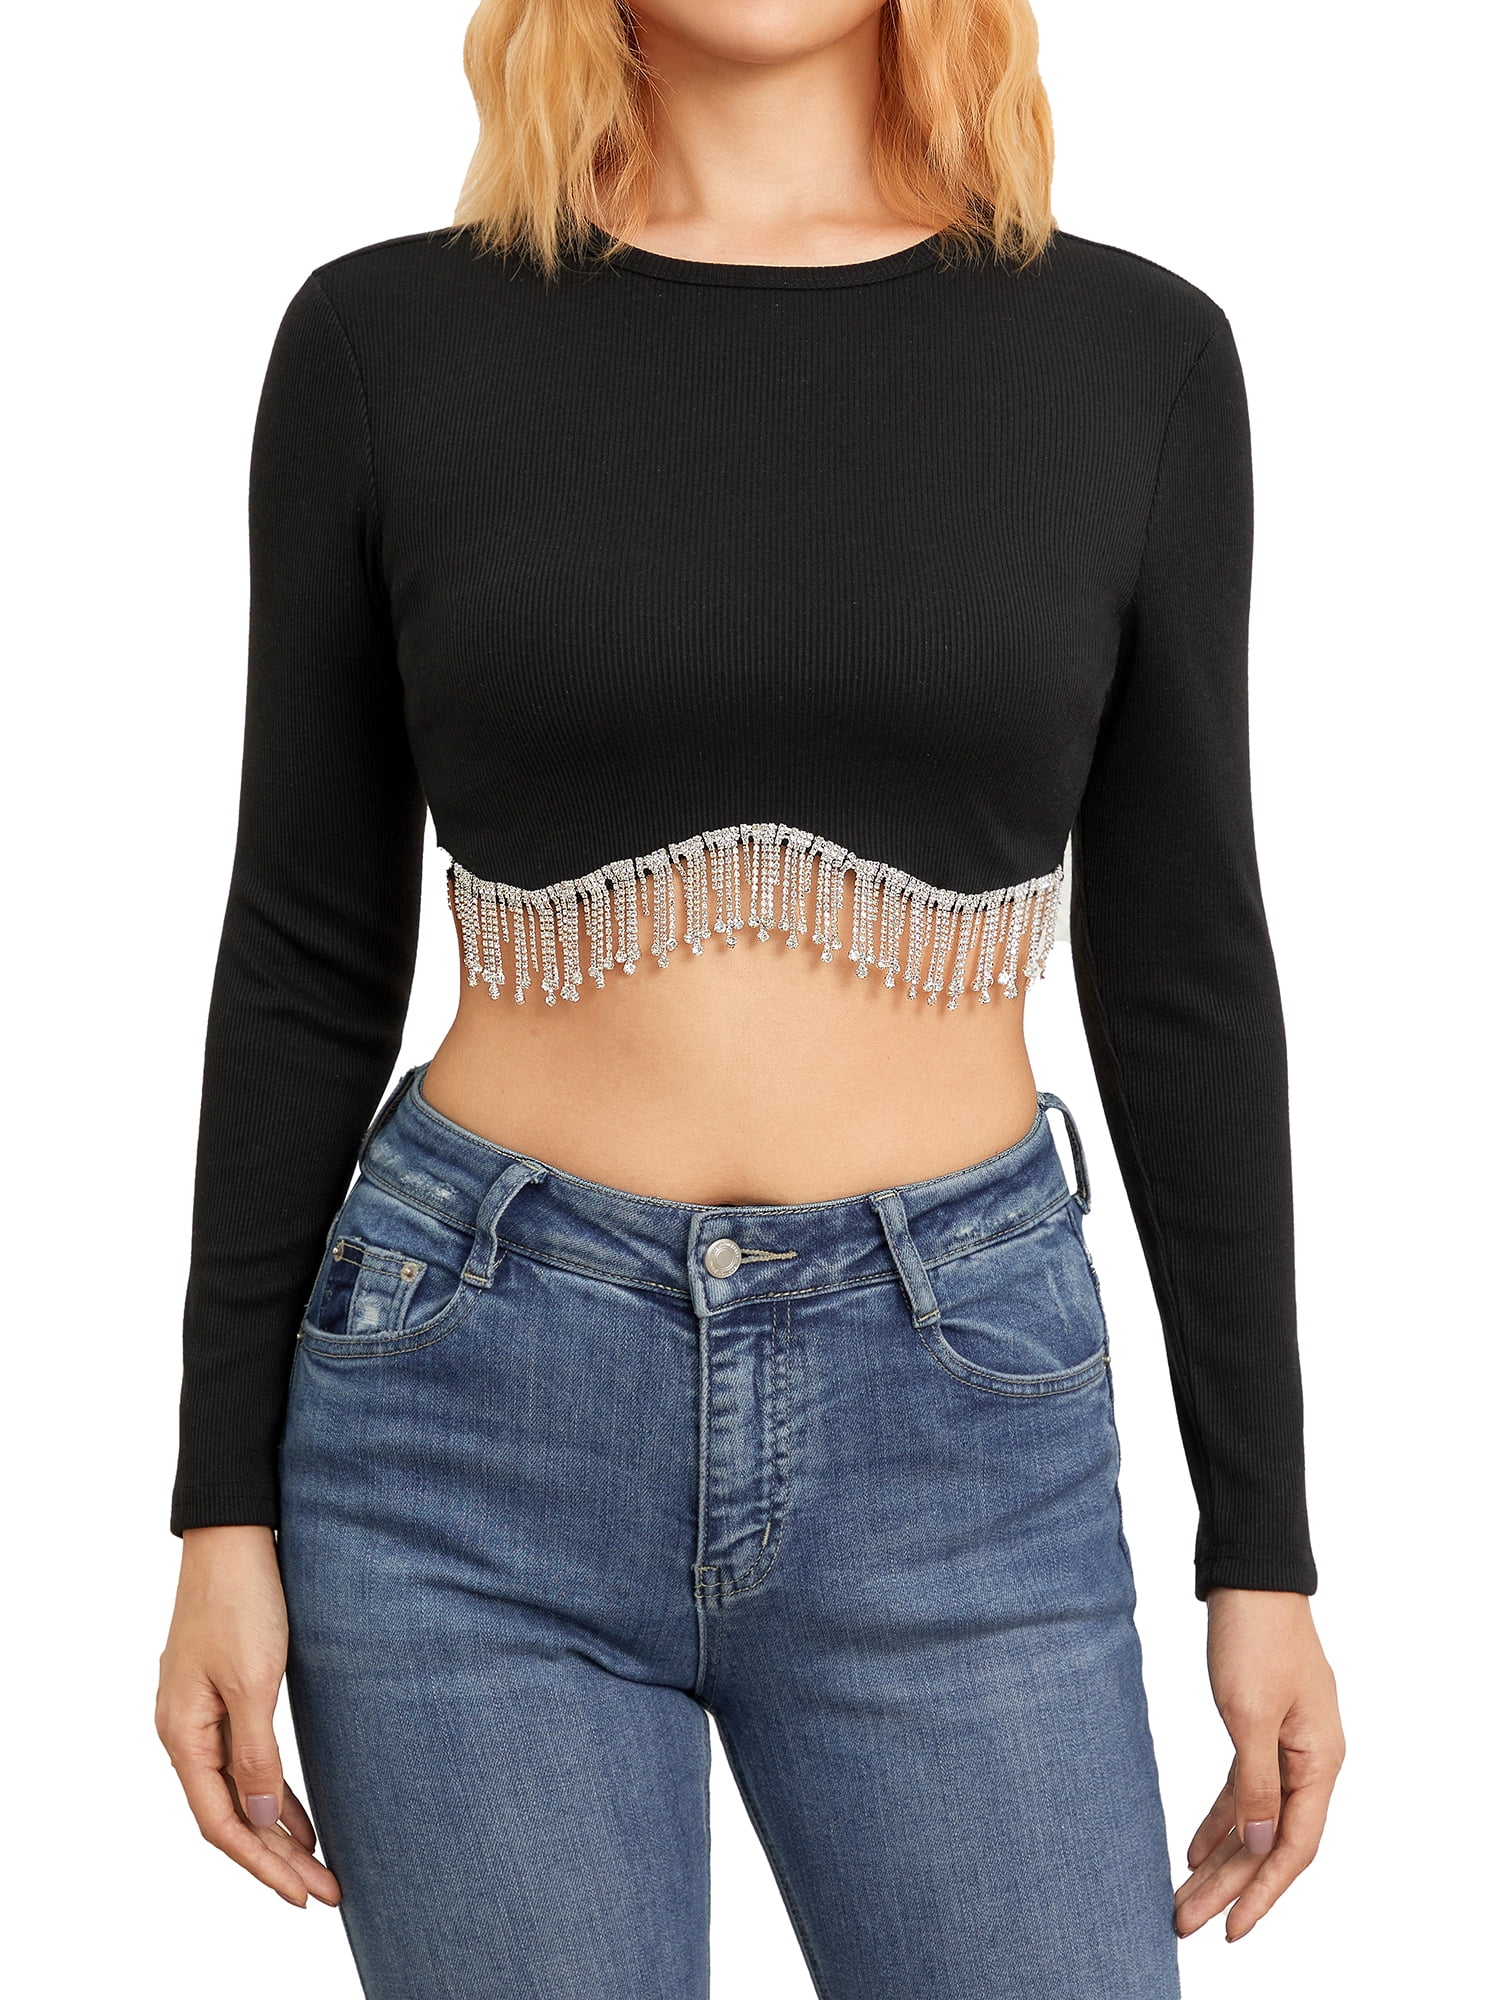 Black Strap Crop Top With Rhinestone Fringe – Free From Label